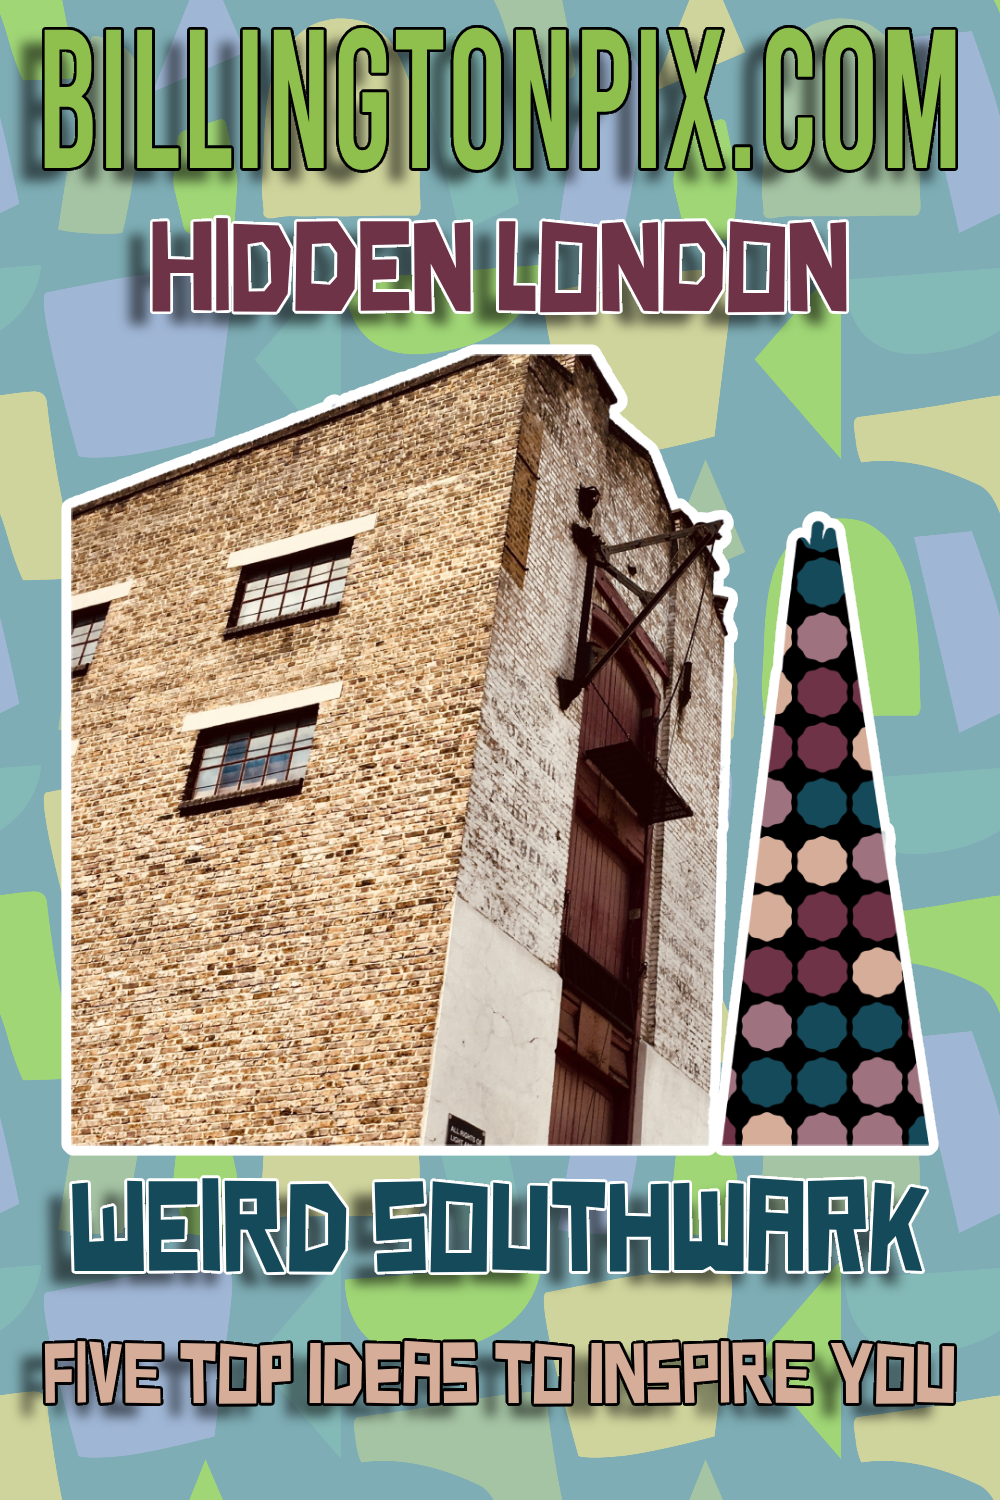 Five Weird and Educational Things to Do in Southwark